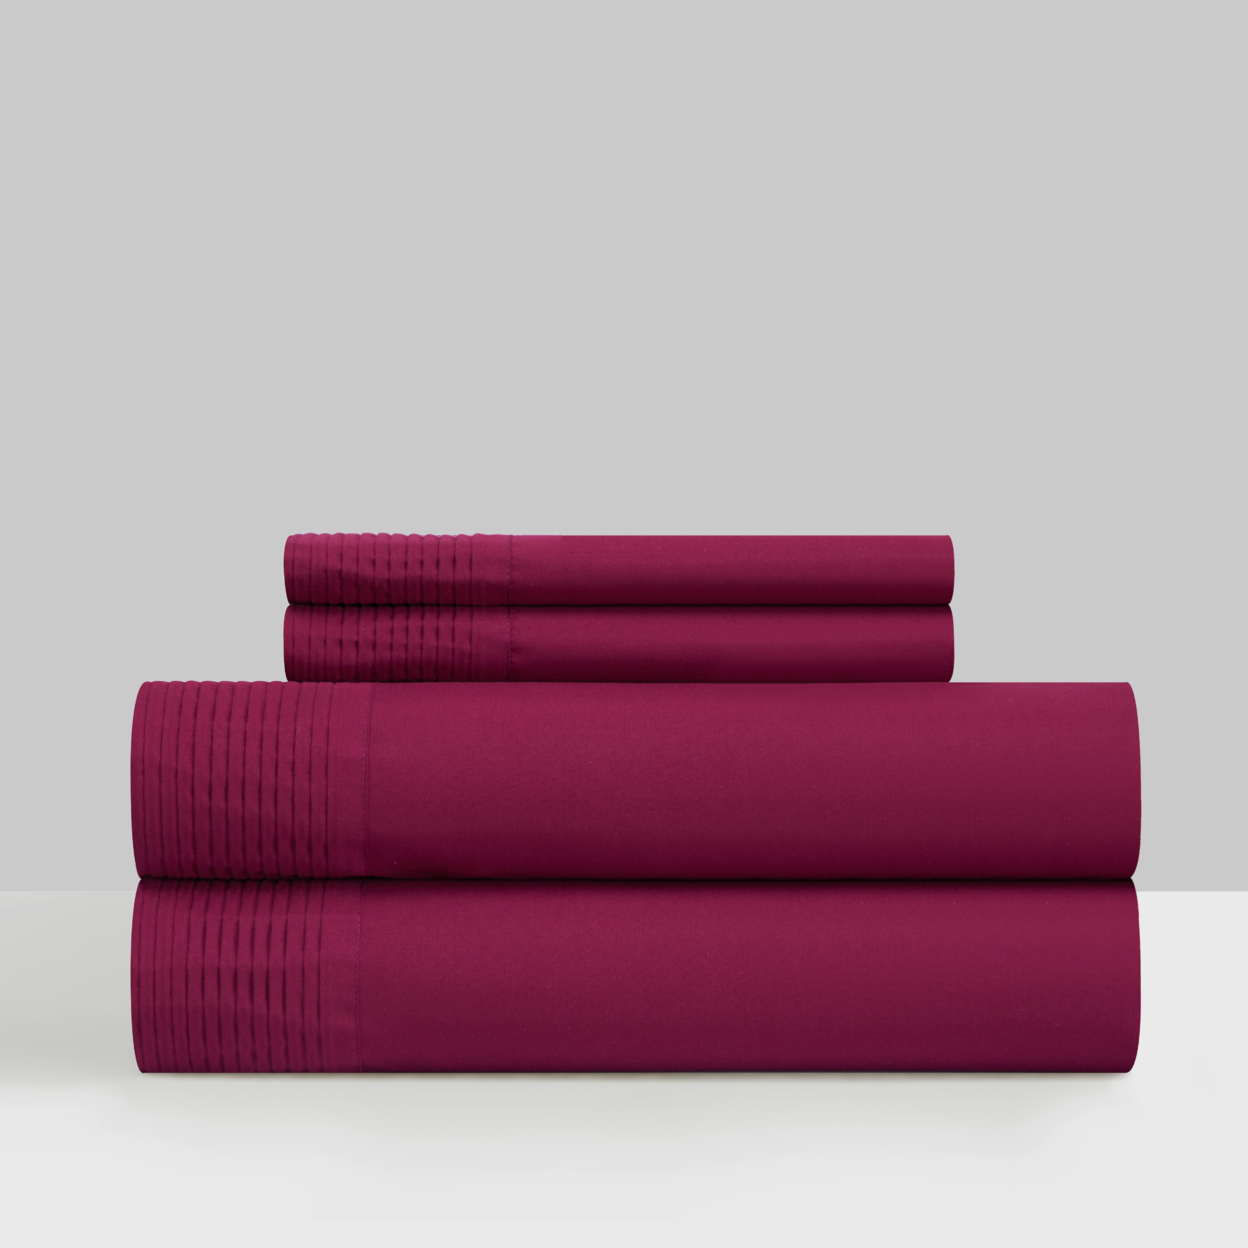 Barley 3 Or 4 Piece Sheet Set Solid Color With Pleated Details - Wine, King